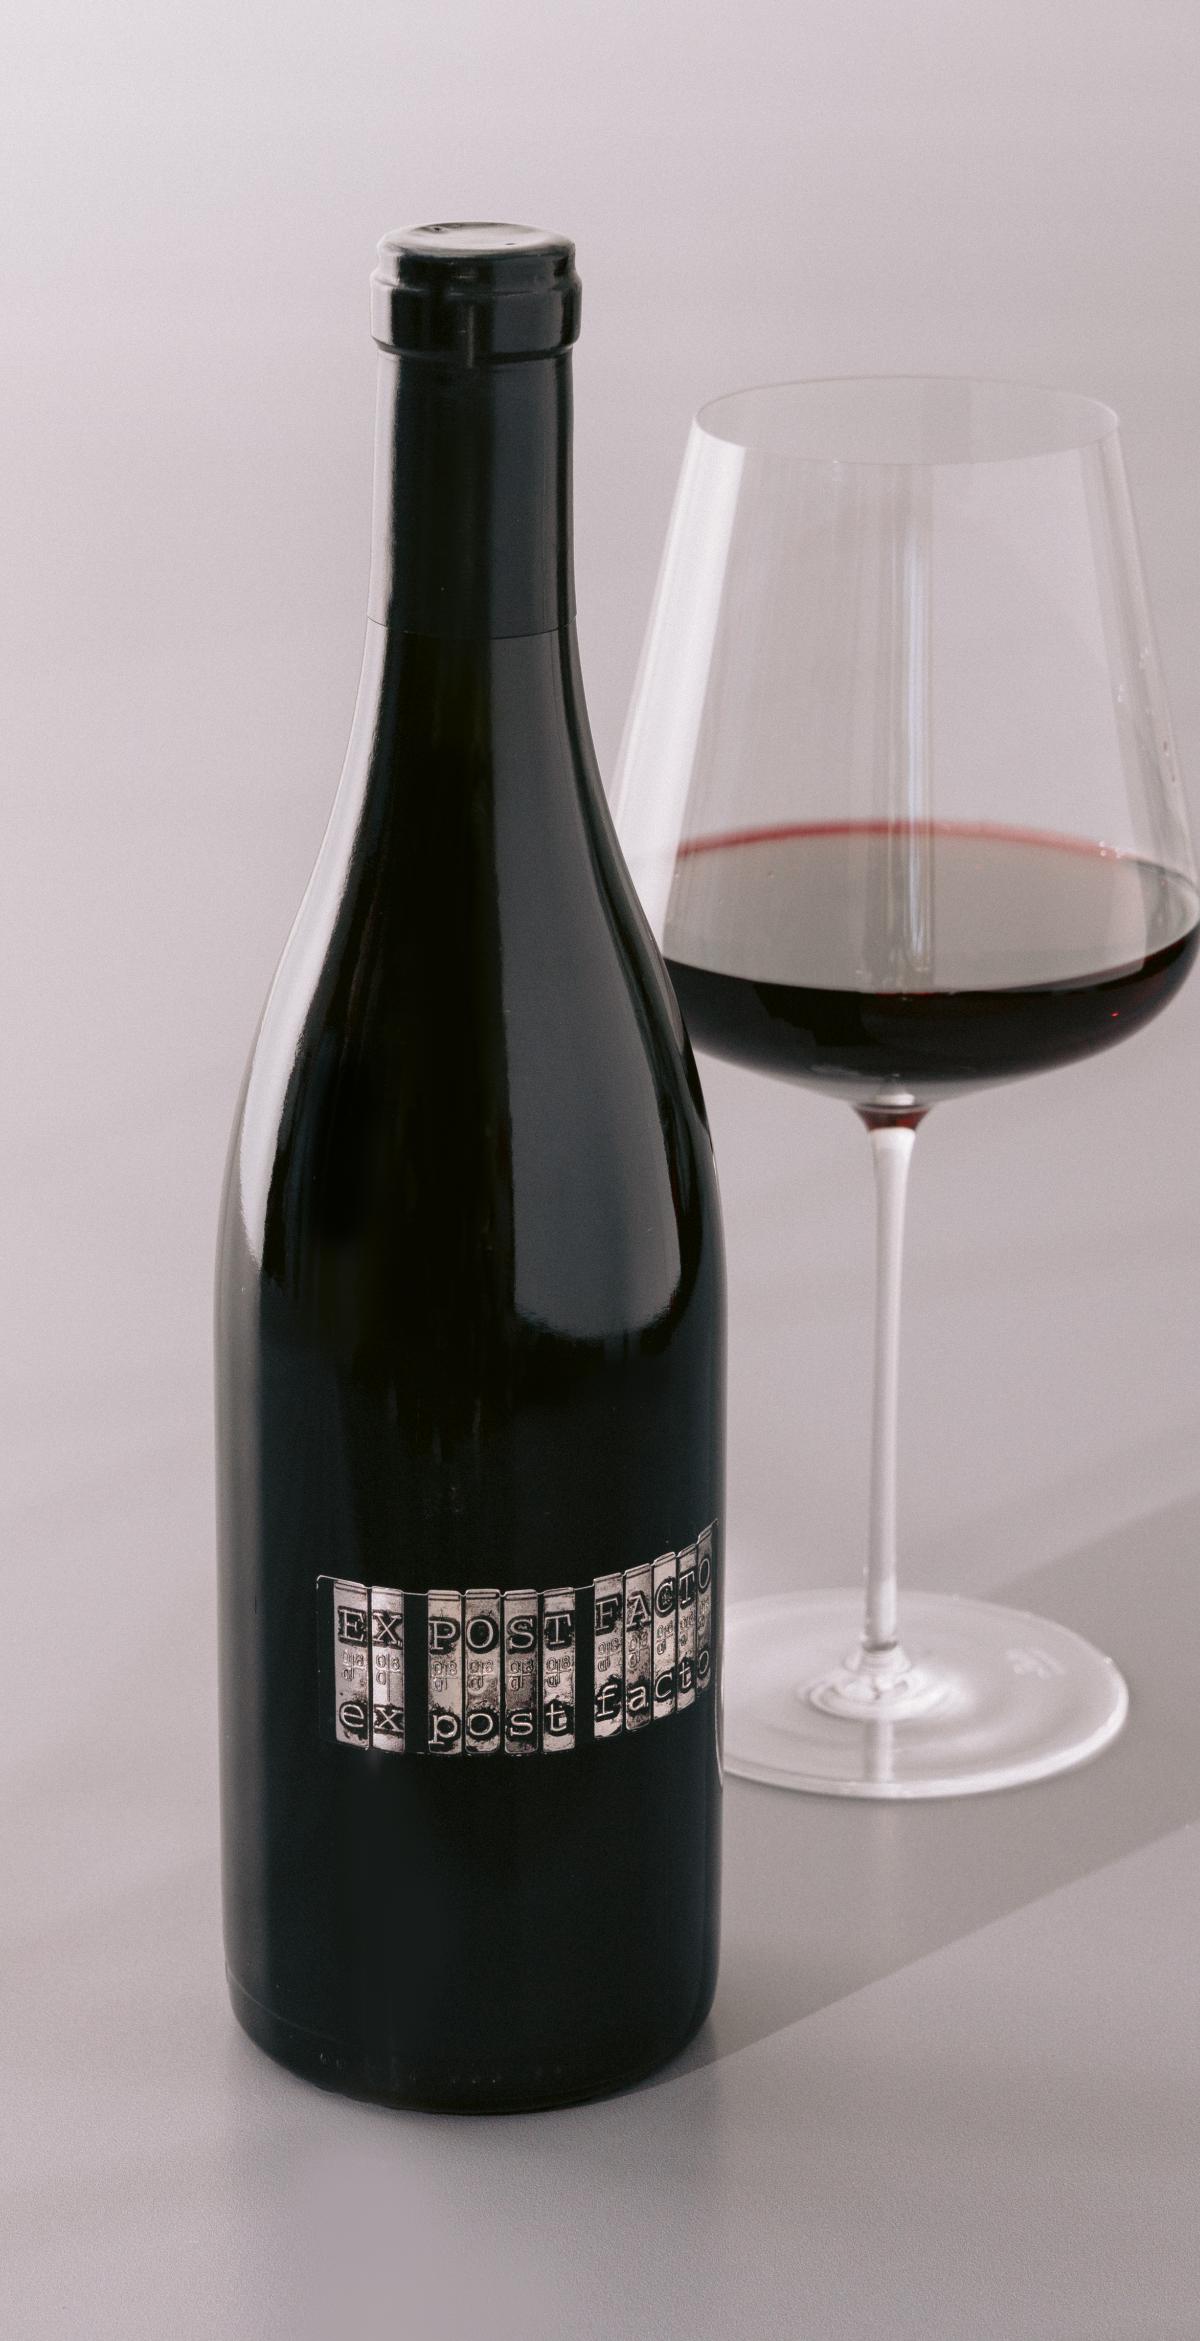 Syrah red wine bottle and wine glass